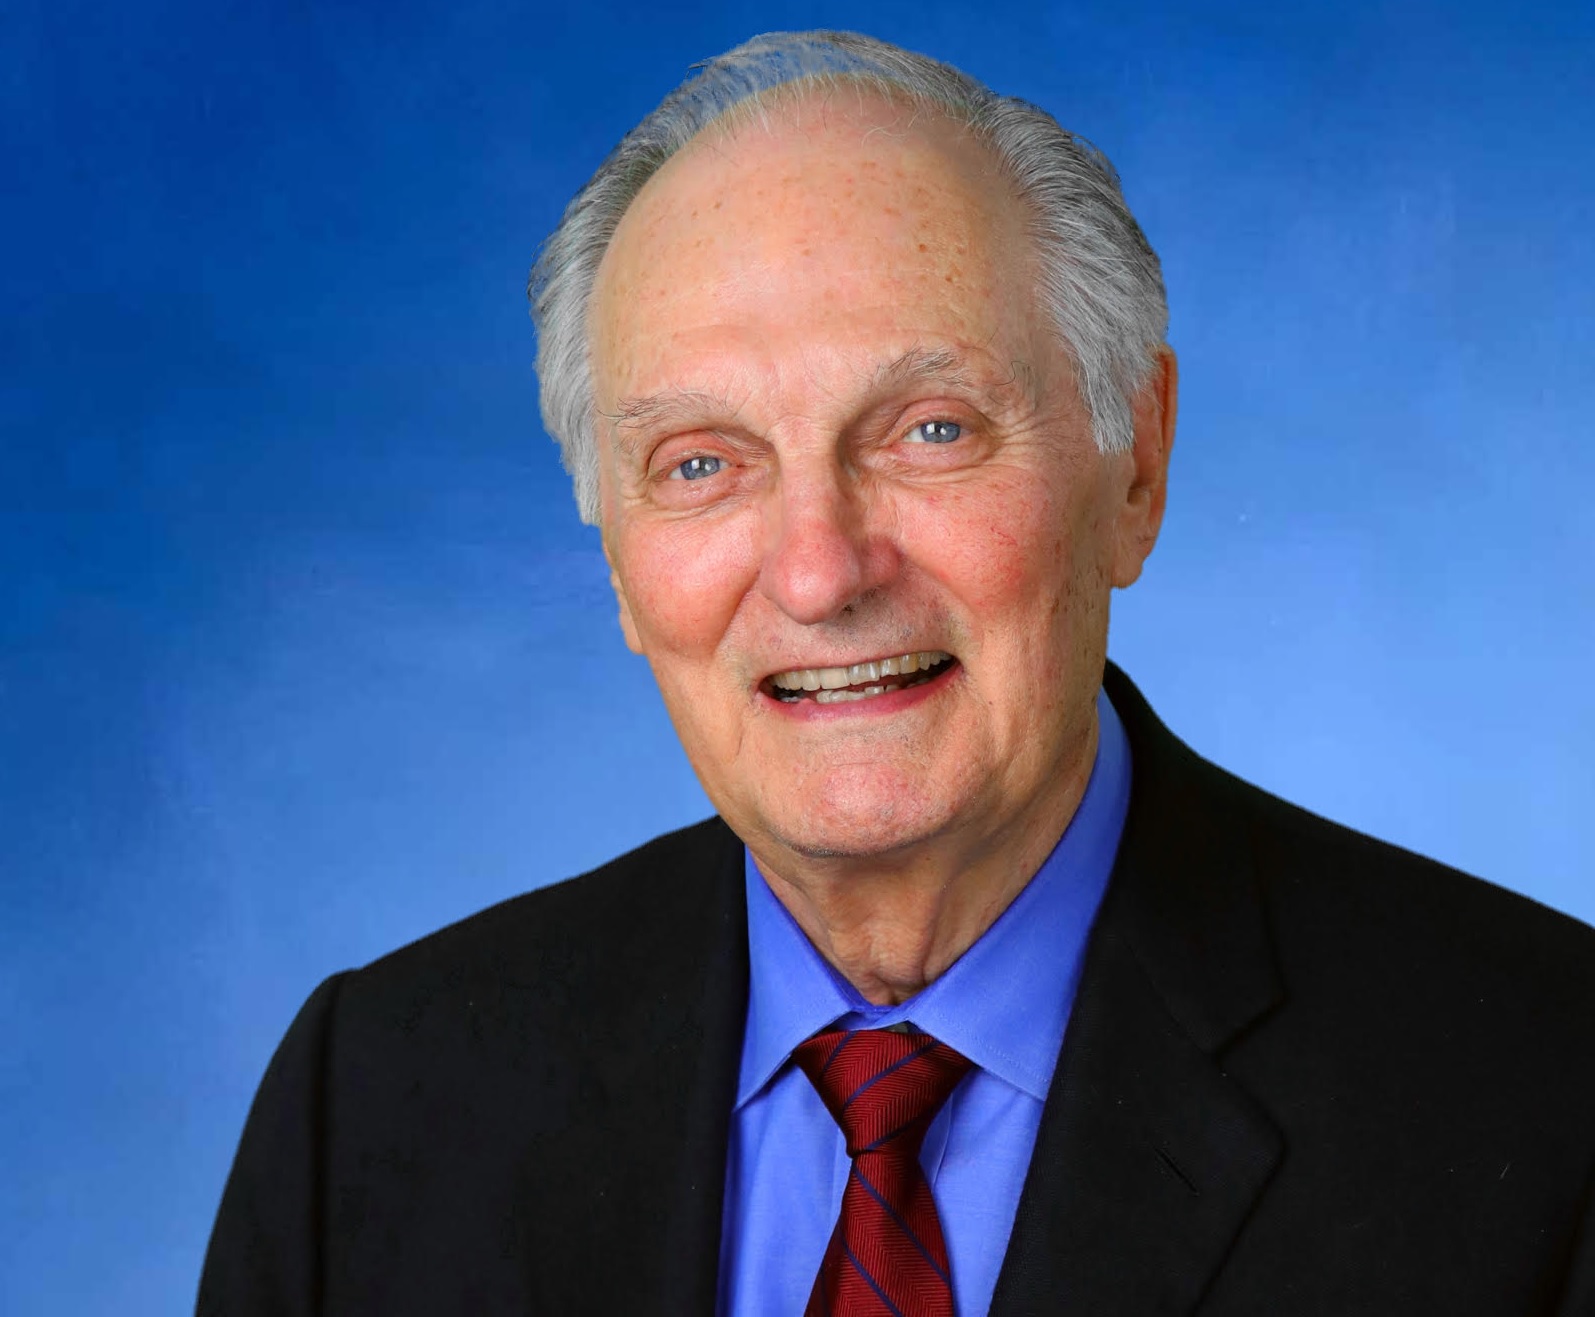 Life's Work: An Interview with Alan Alda